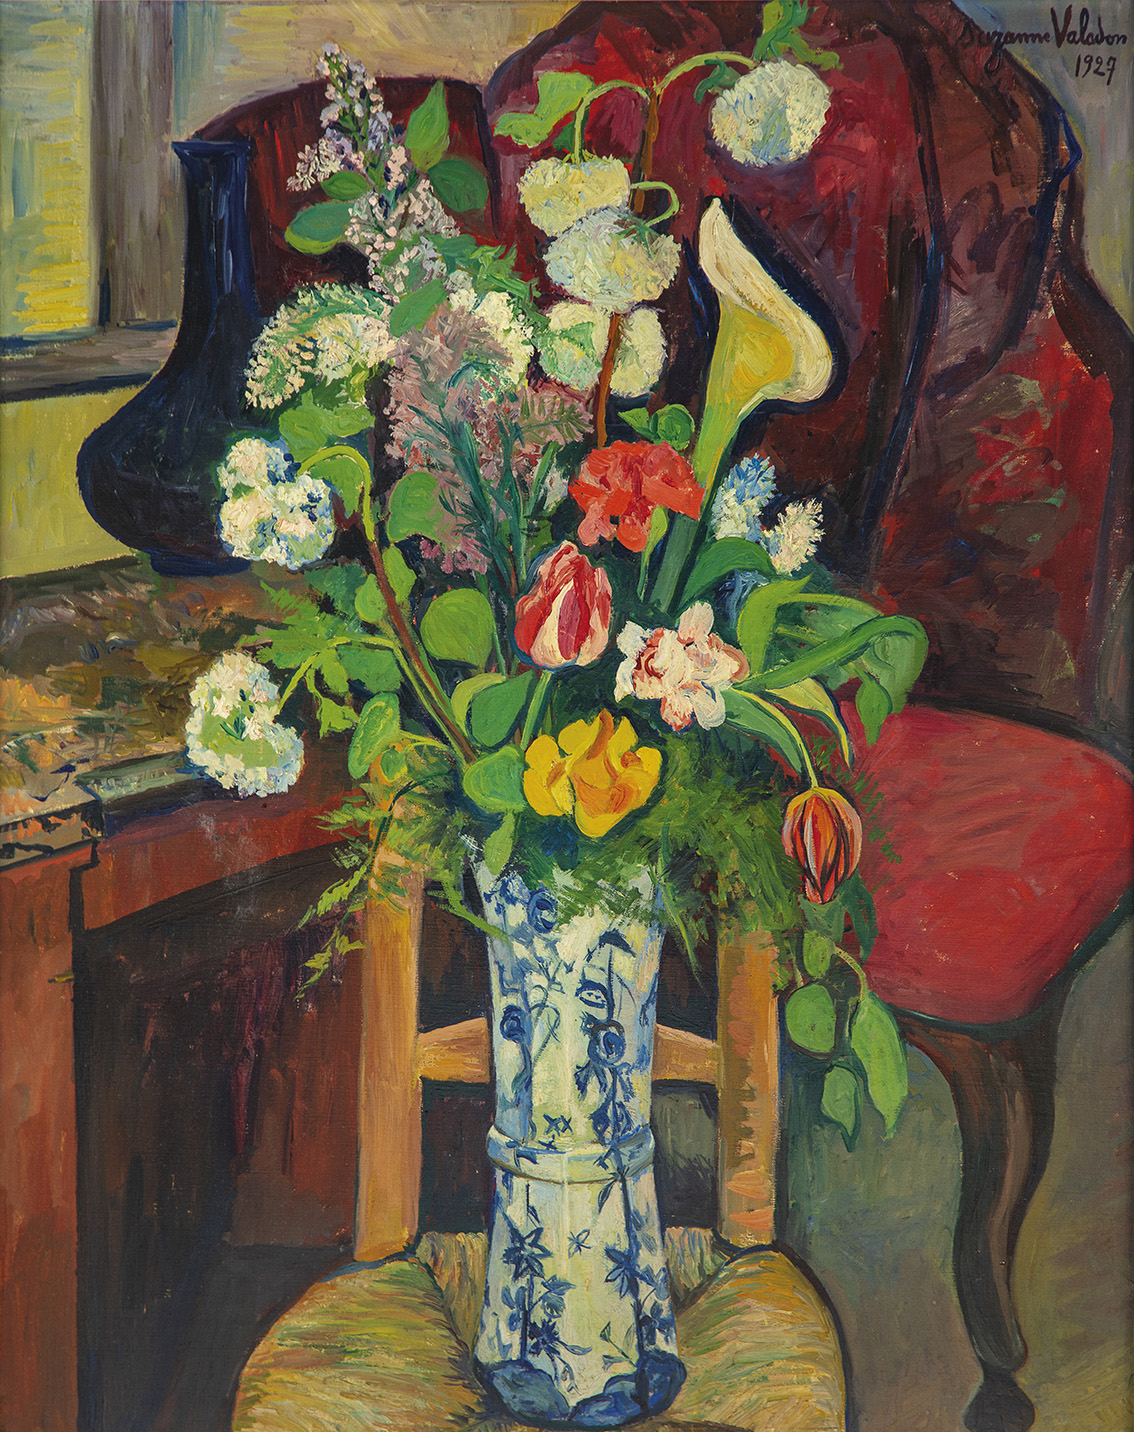 Flowers for Suzanne Valadon